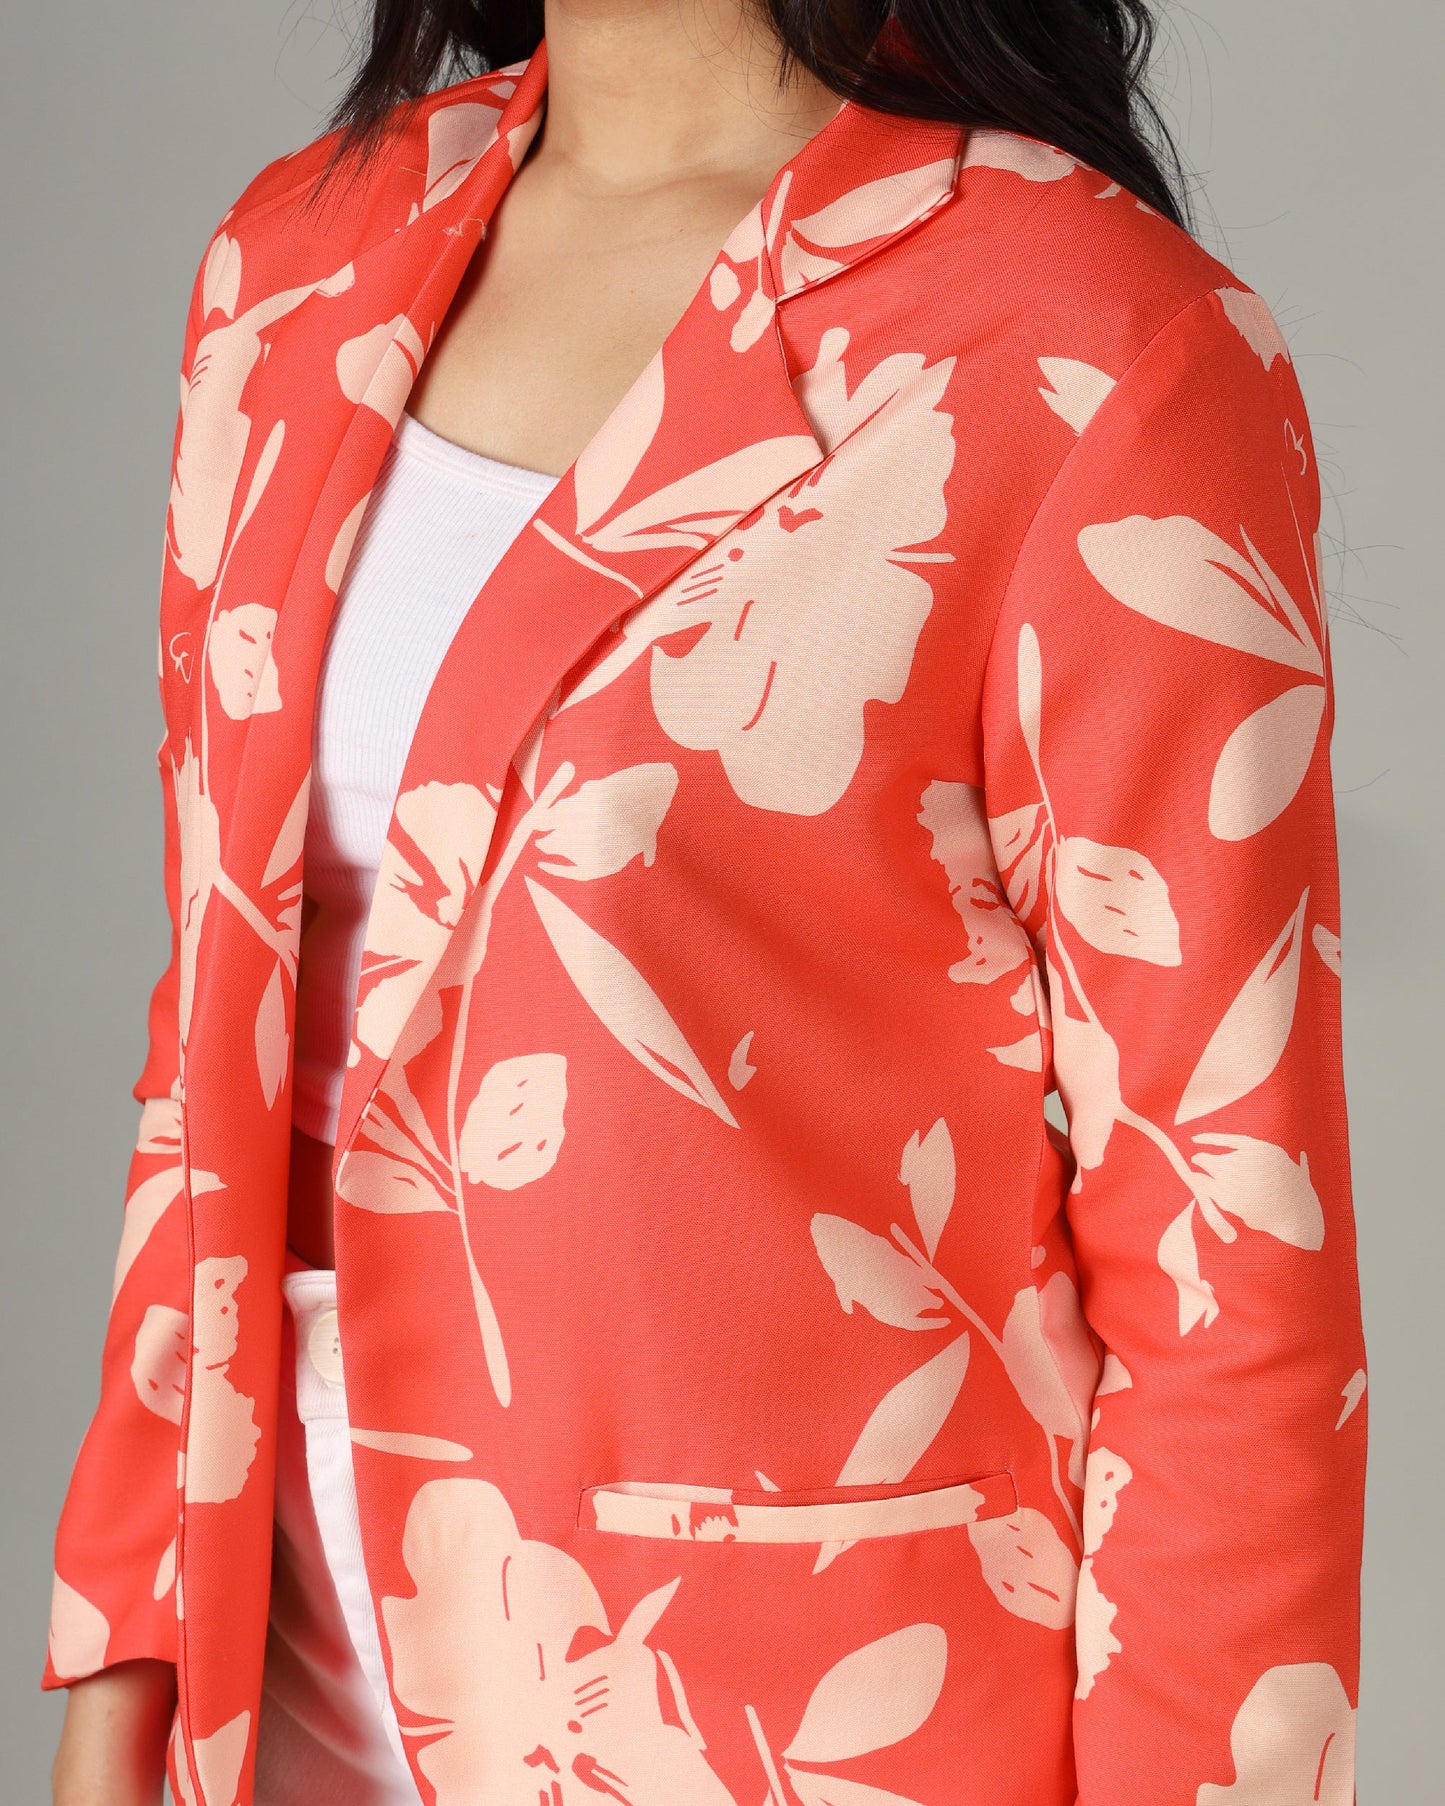 Blossom Into Style With Floral Women's Jacket